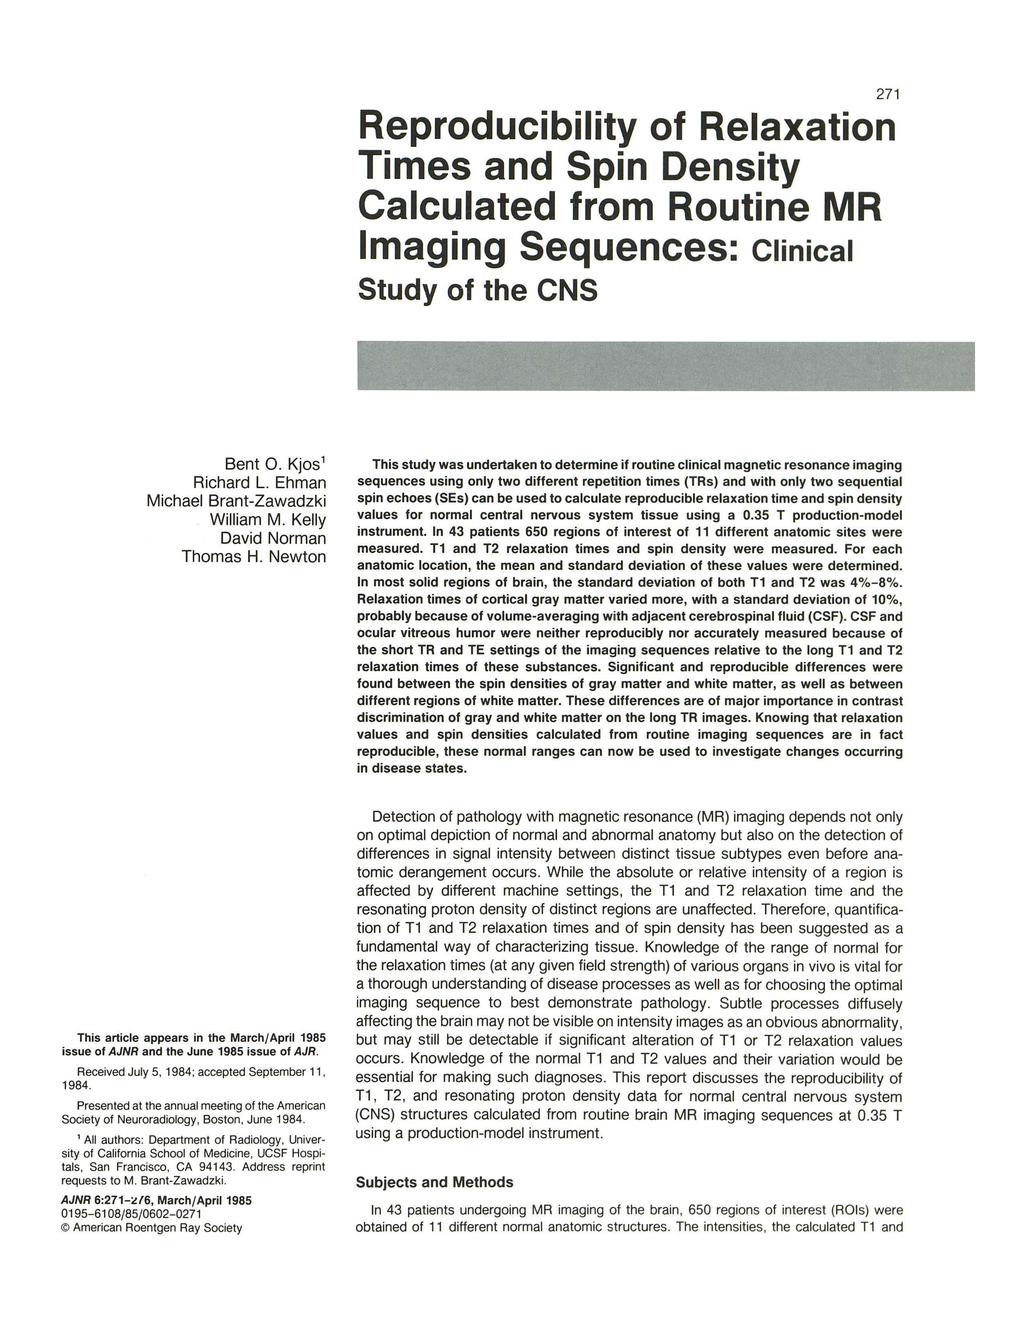 271 Reproducibility of Relaxation Times and Spin Density Calculated from Routine MR Imaging Sequences: Clinical Study of the CNS Bent O. Kjos' Richard L. Ehman Michael Brant-Zawadzki William M.